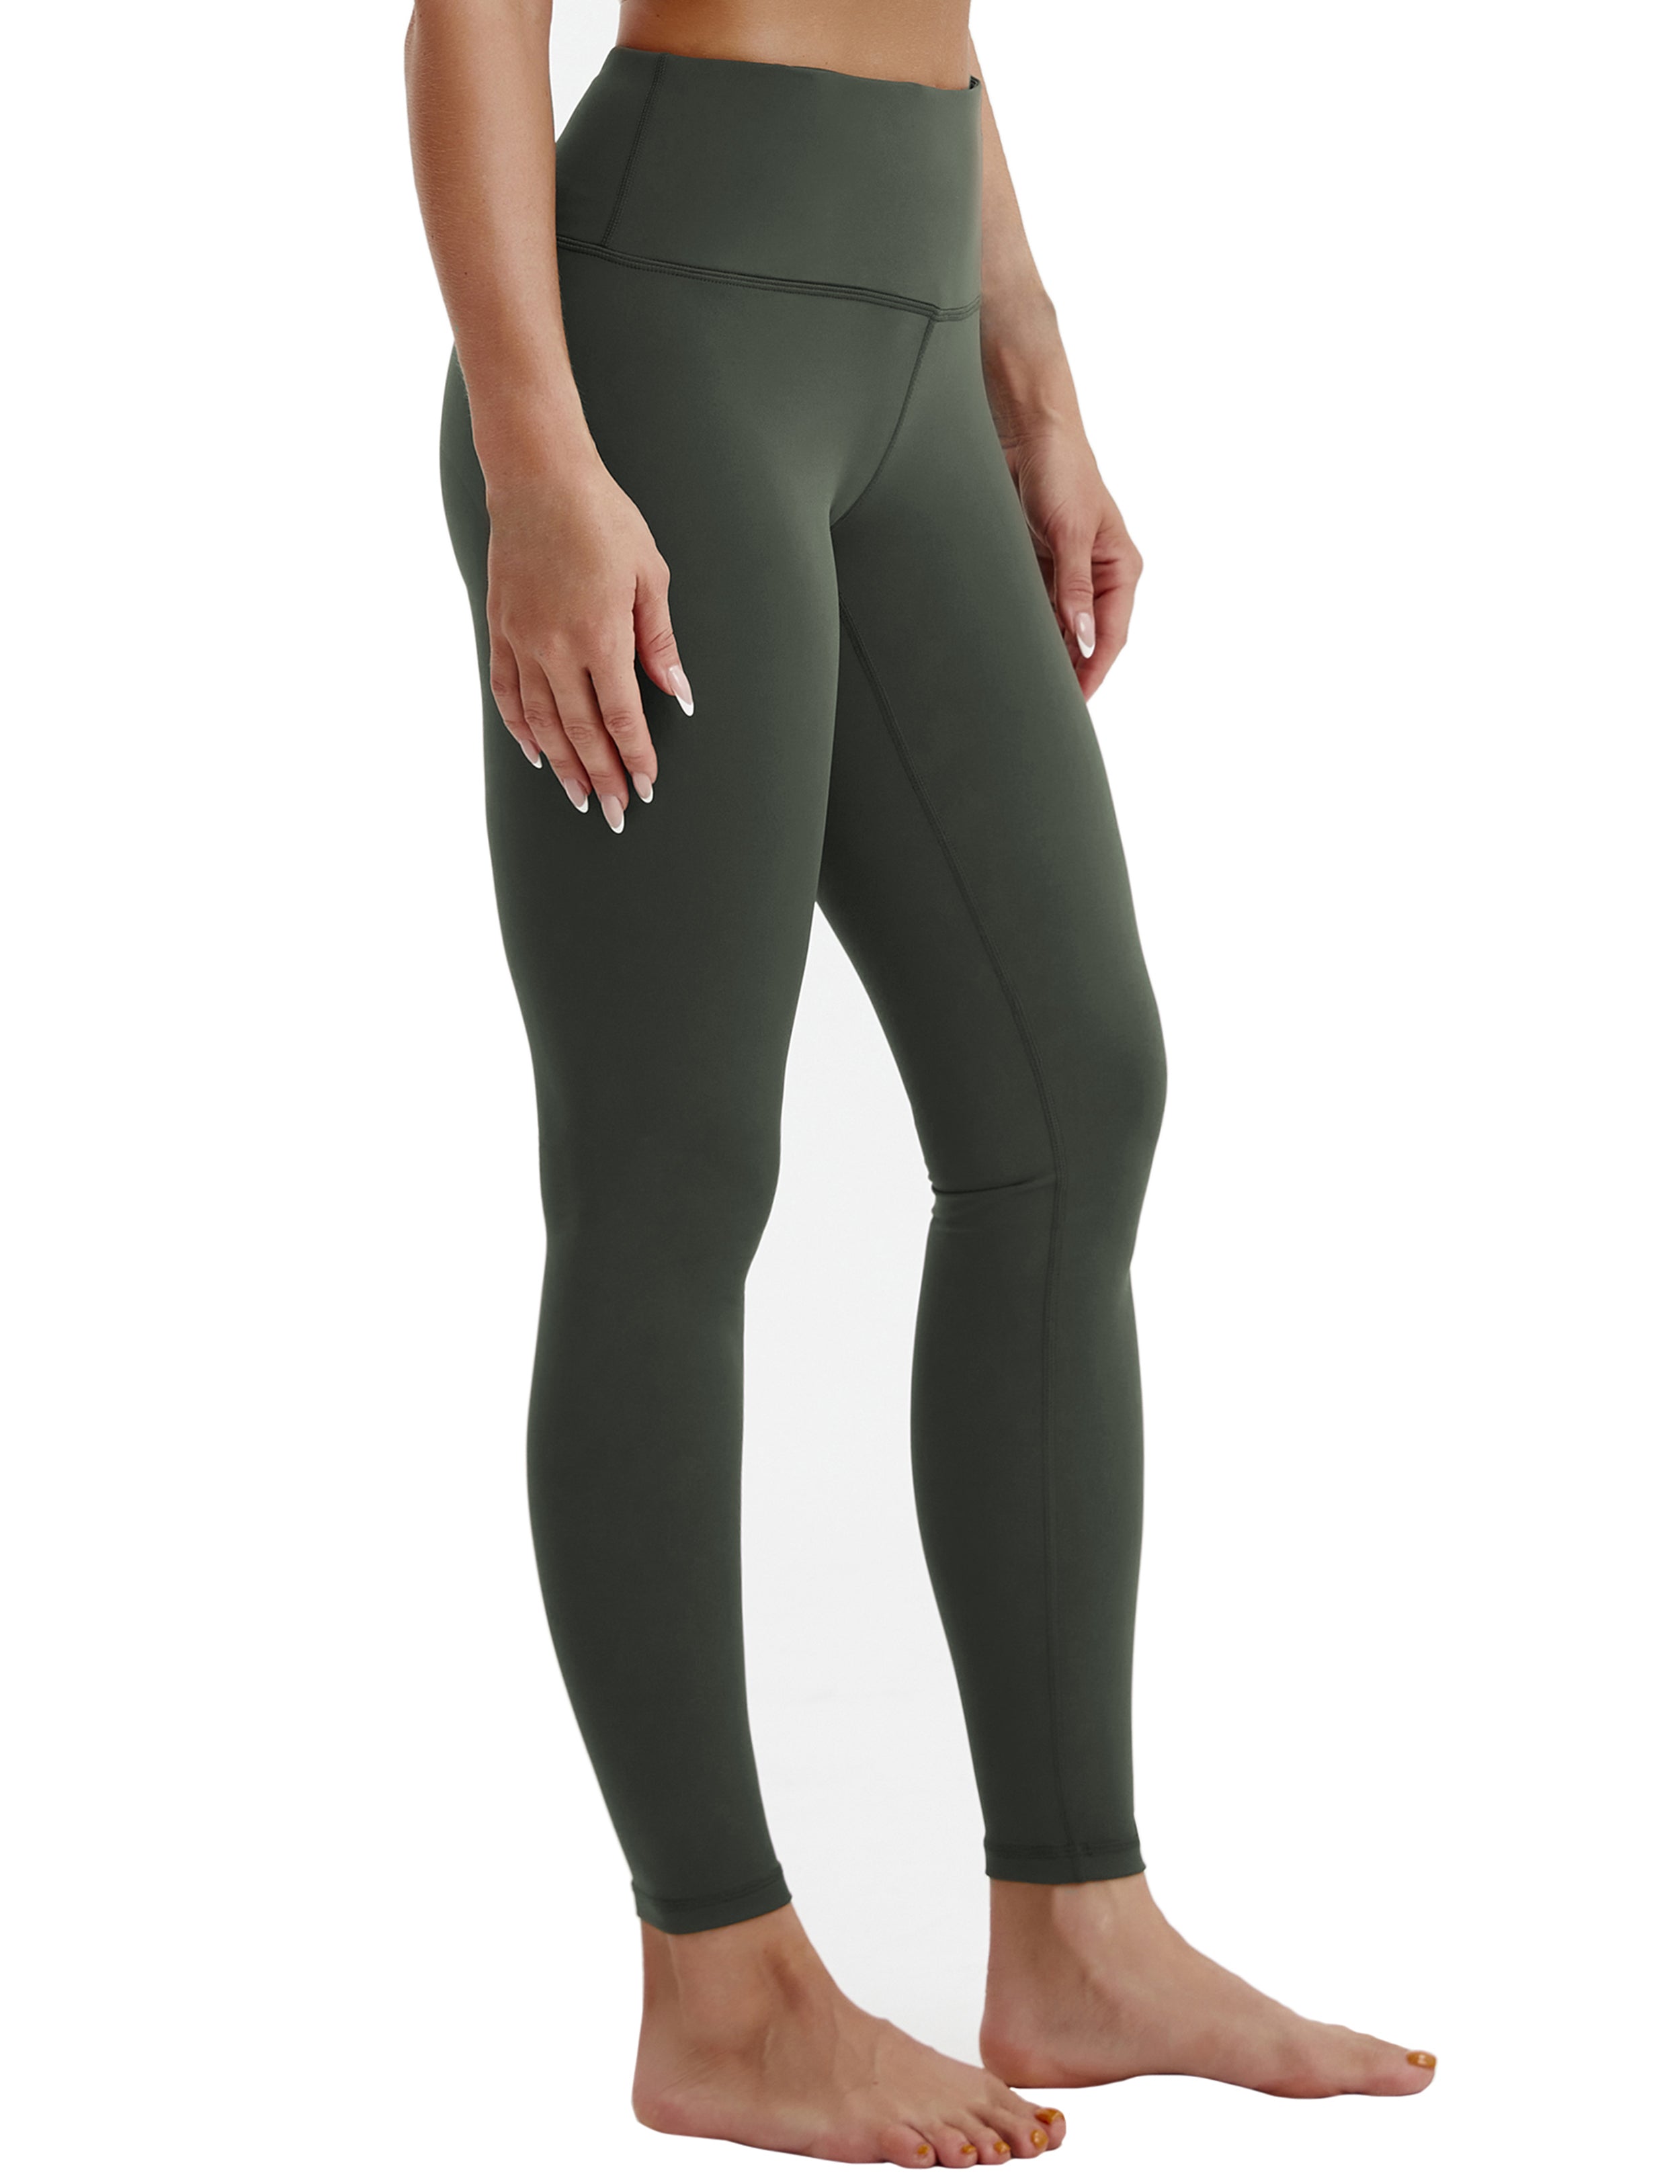 High Waist Golf Pants olivegray 75%Nylon/25%Spandex Fabric doesn't attract lint easily 4-way stretch No see-through Moisture-wicking Tummy control Inner pocket Four lengths